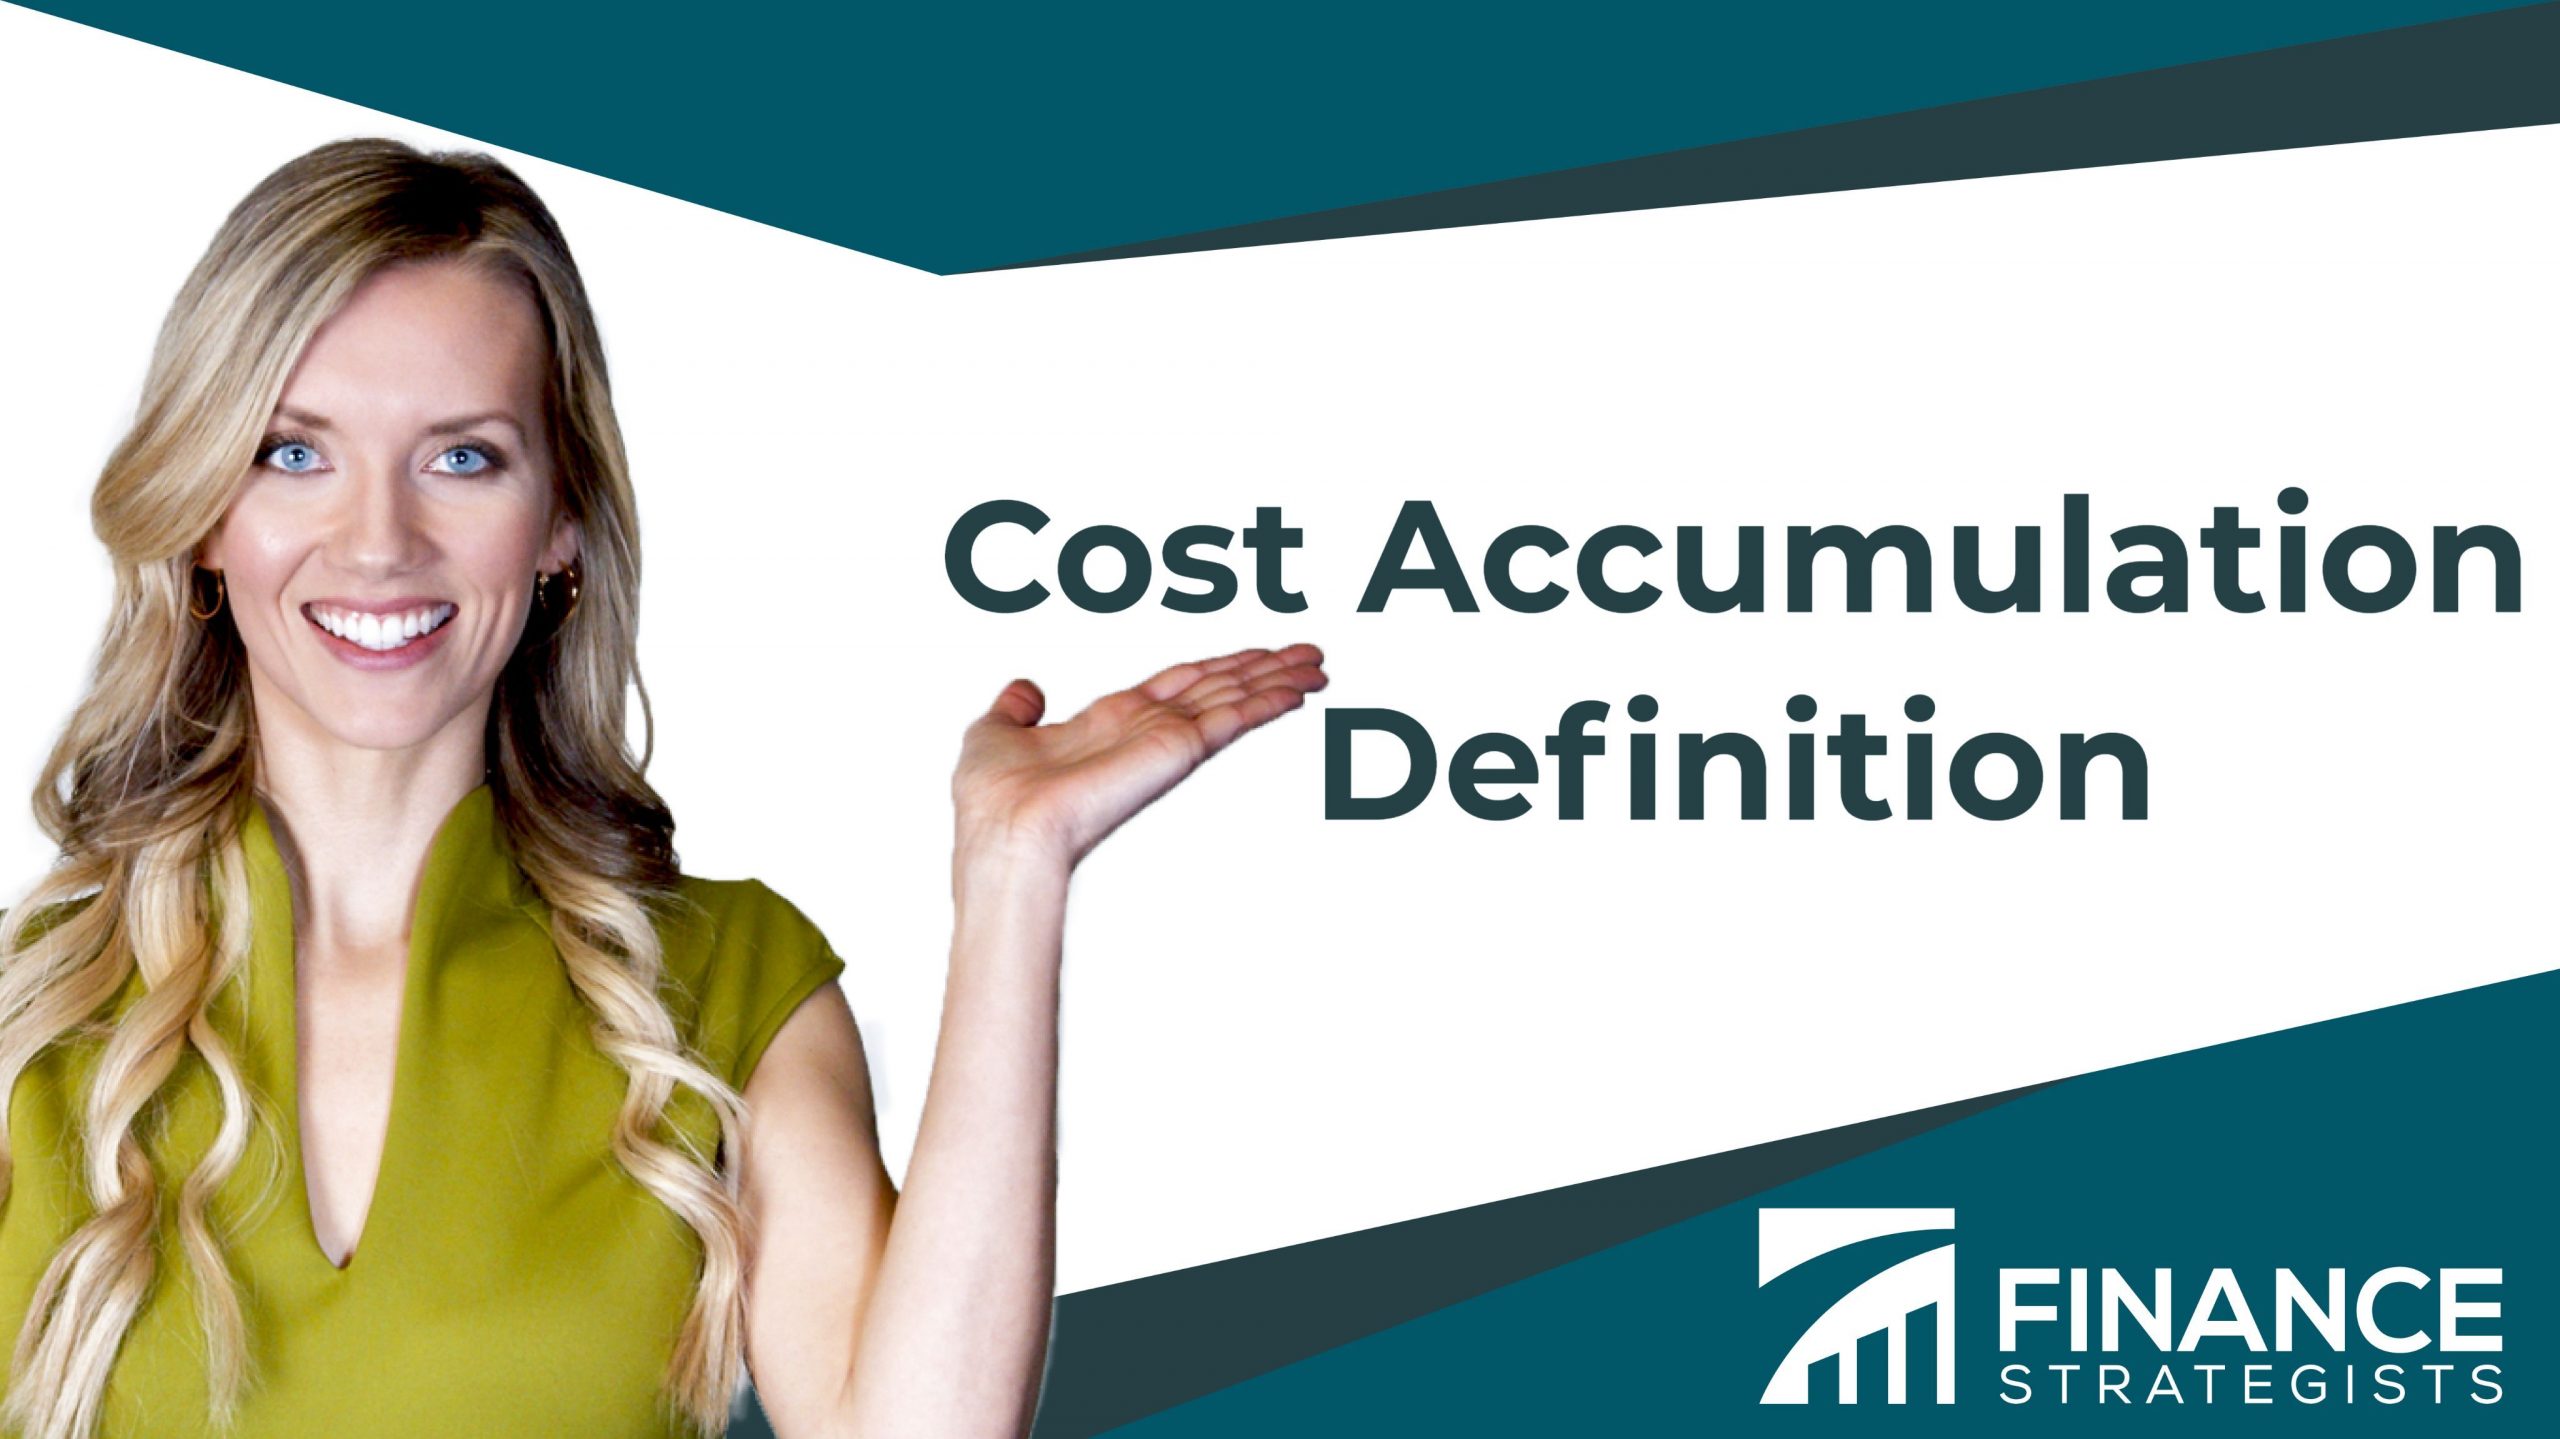 cost assignment is the same as cost accumulation